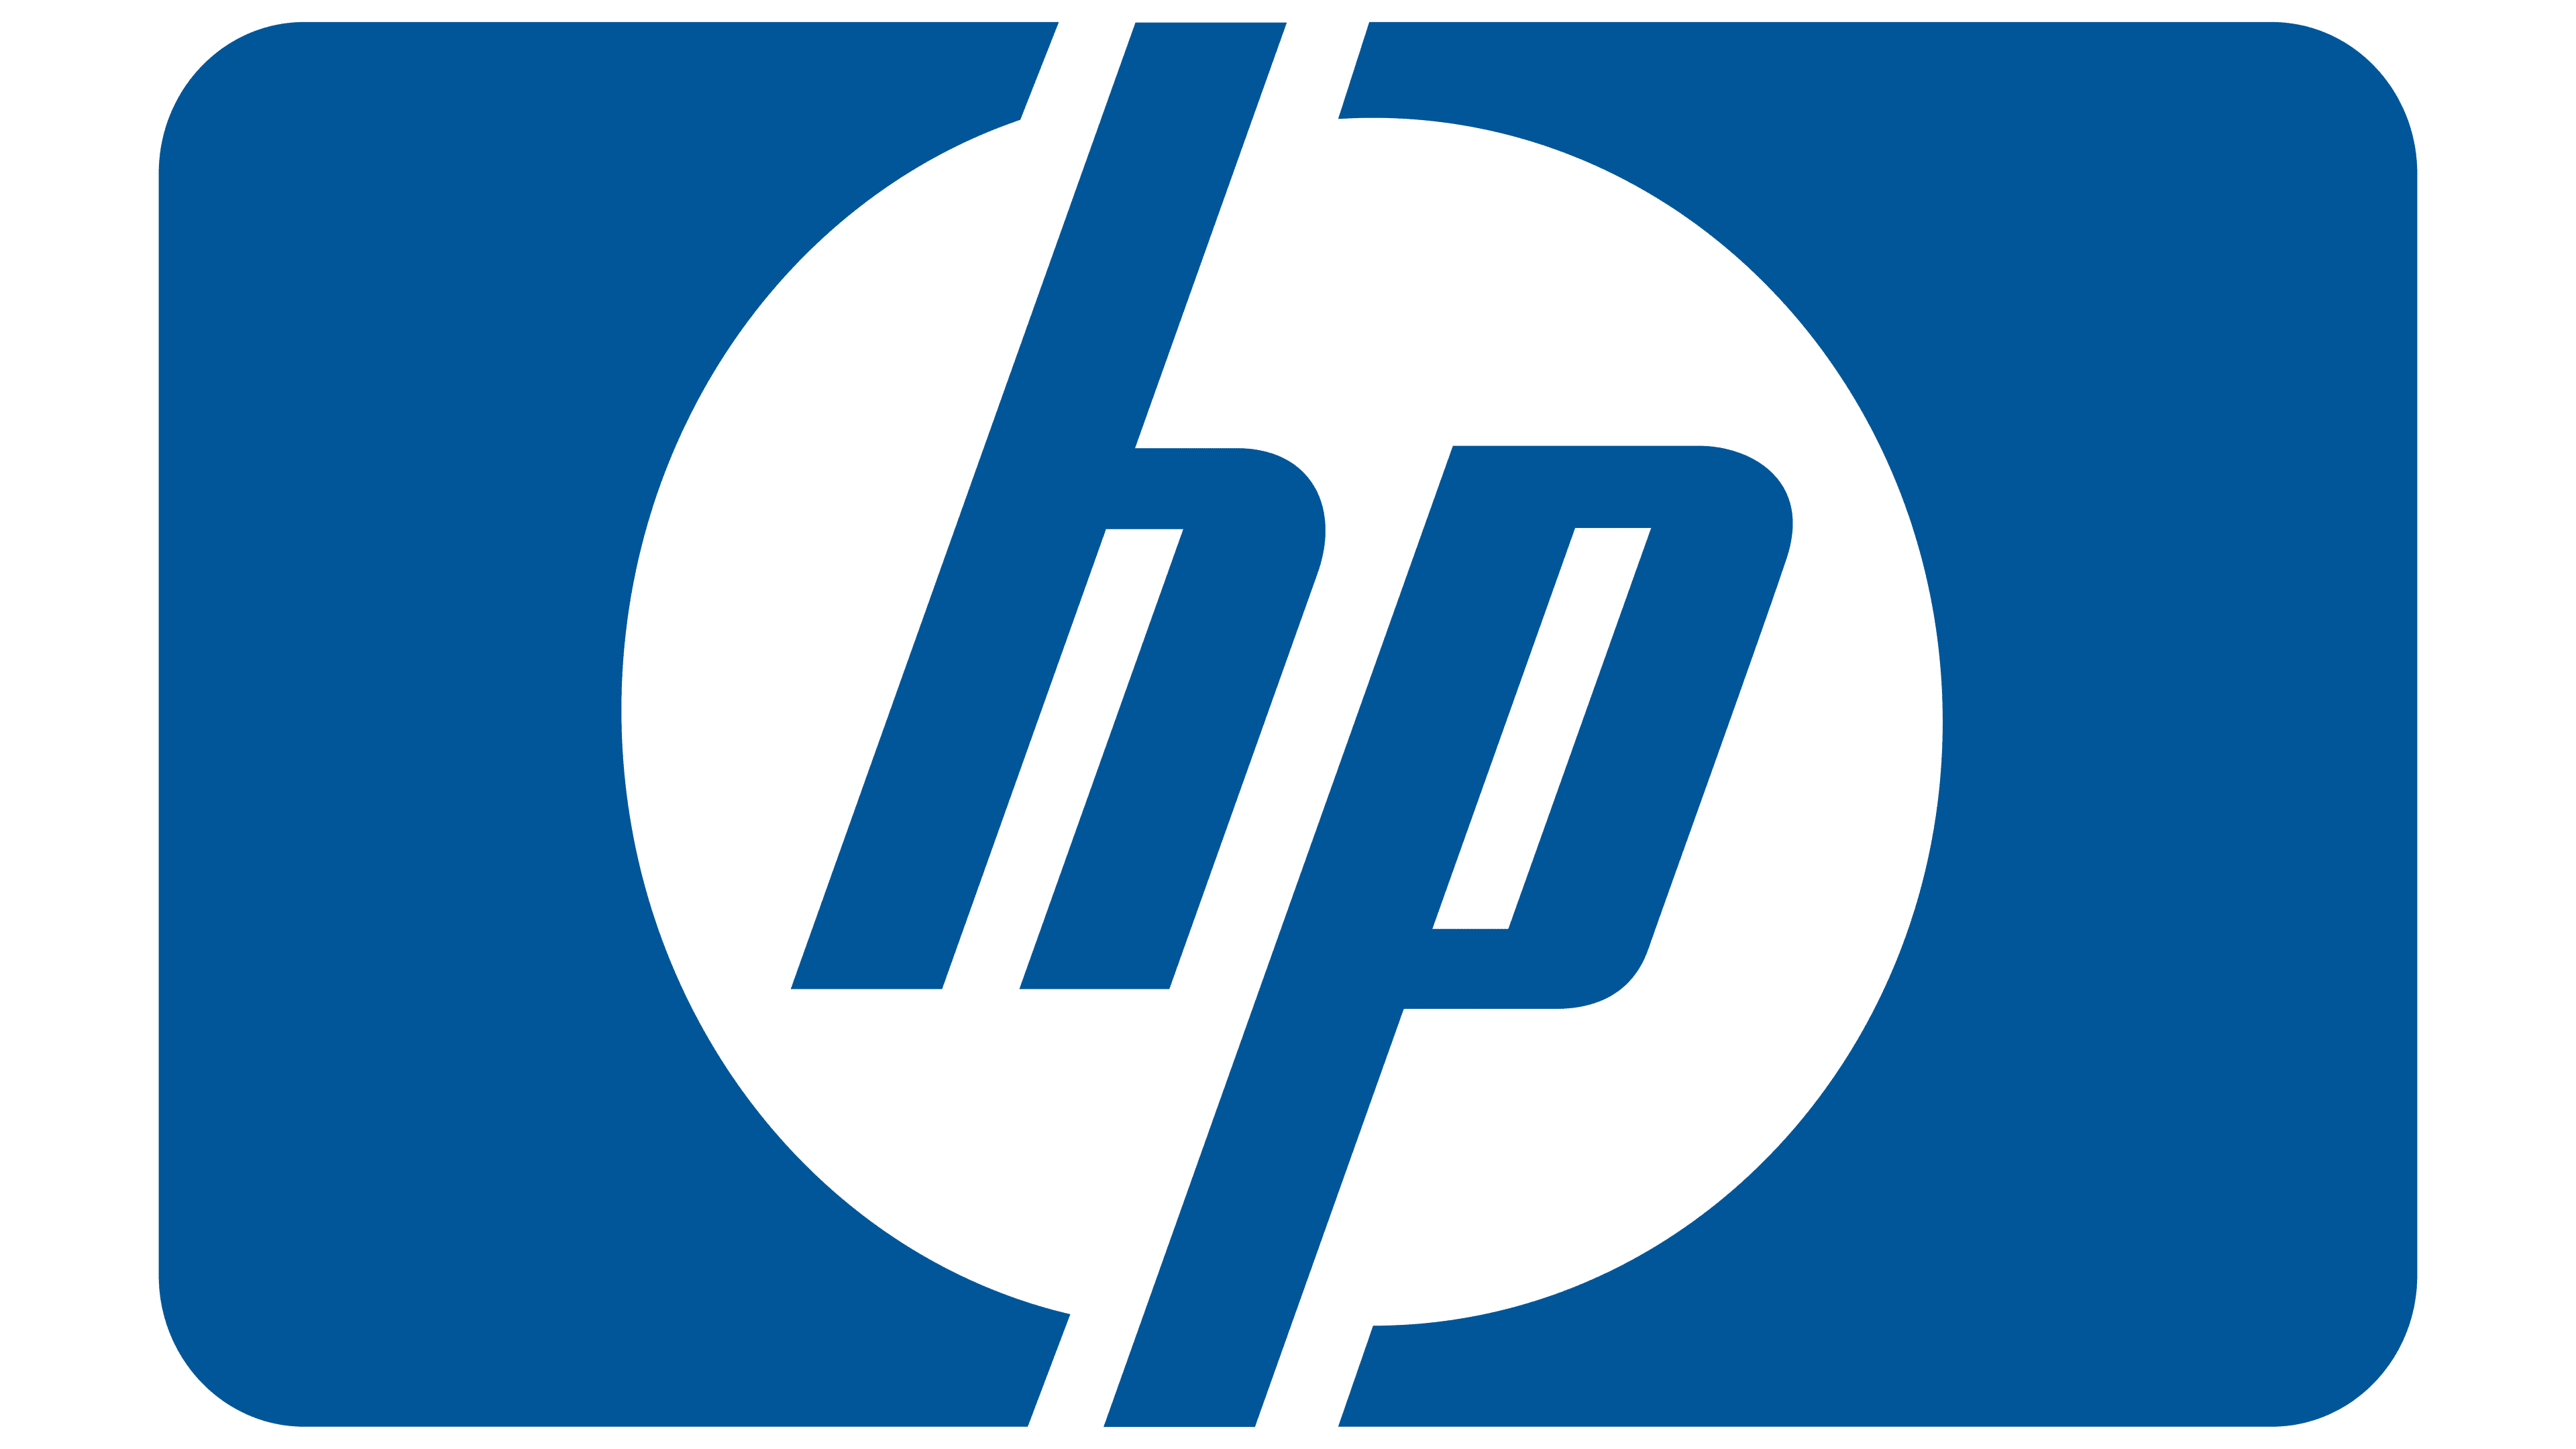 HP Logo, symbol, meaning, history, PNG, brand